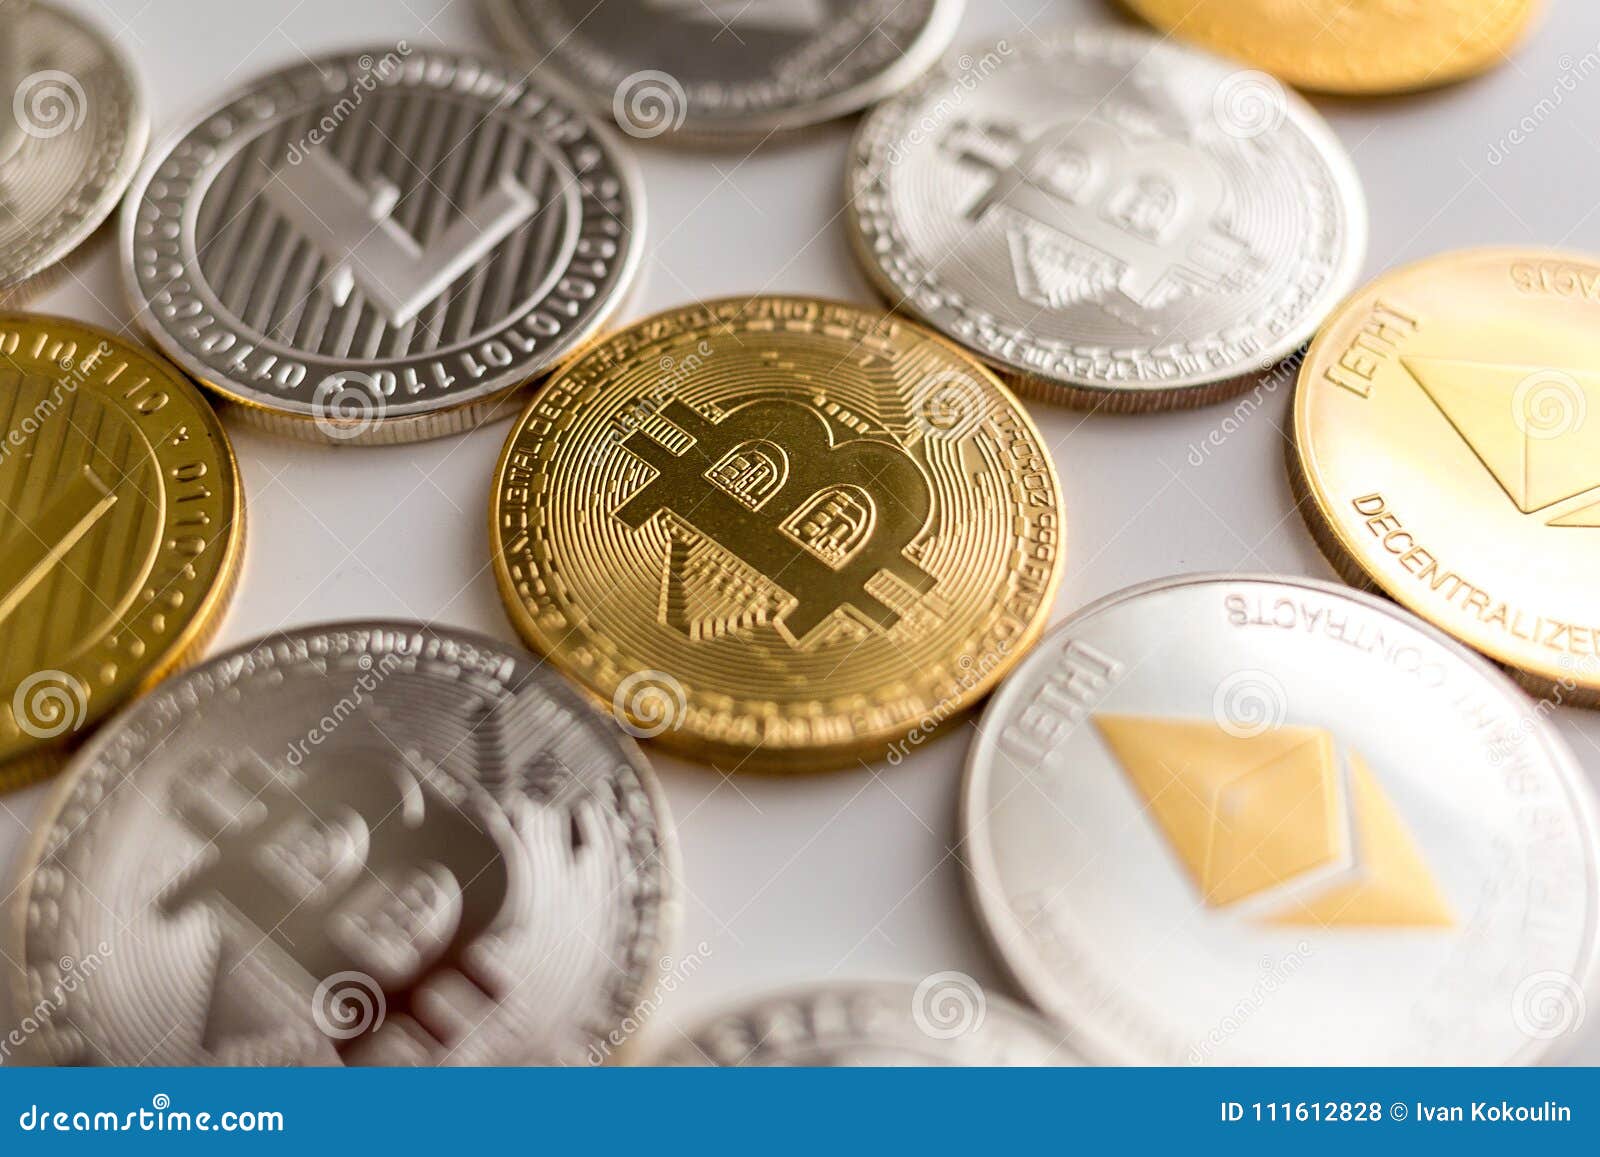 Real Bitcoin Litecoin And Ethereum Coins Together Stock Photo - 